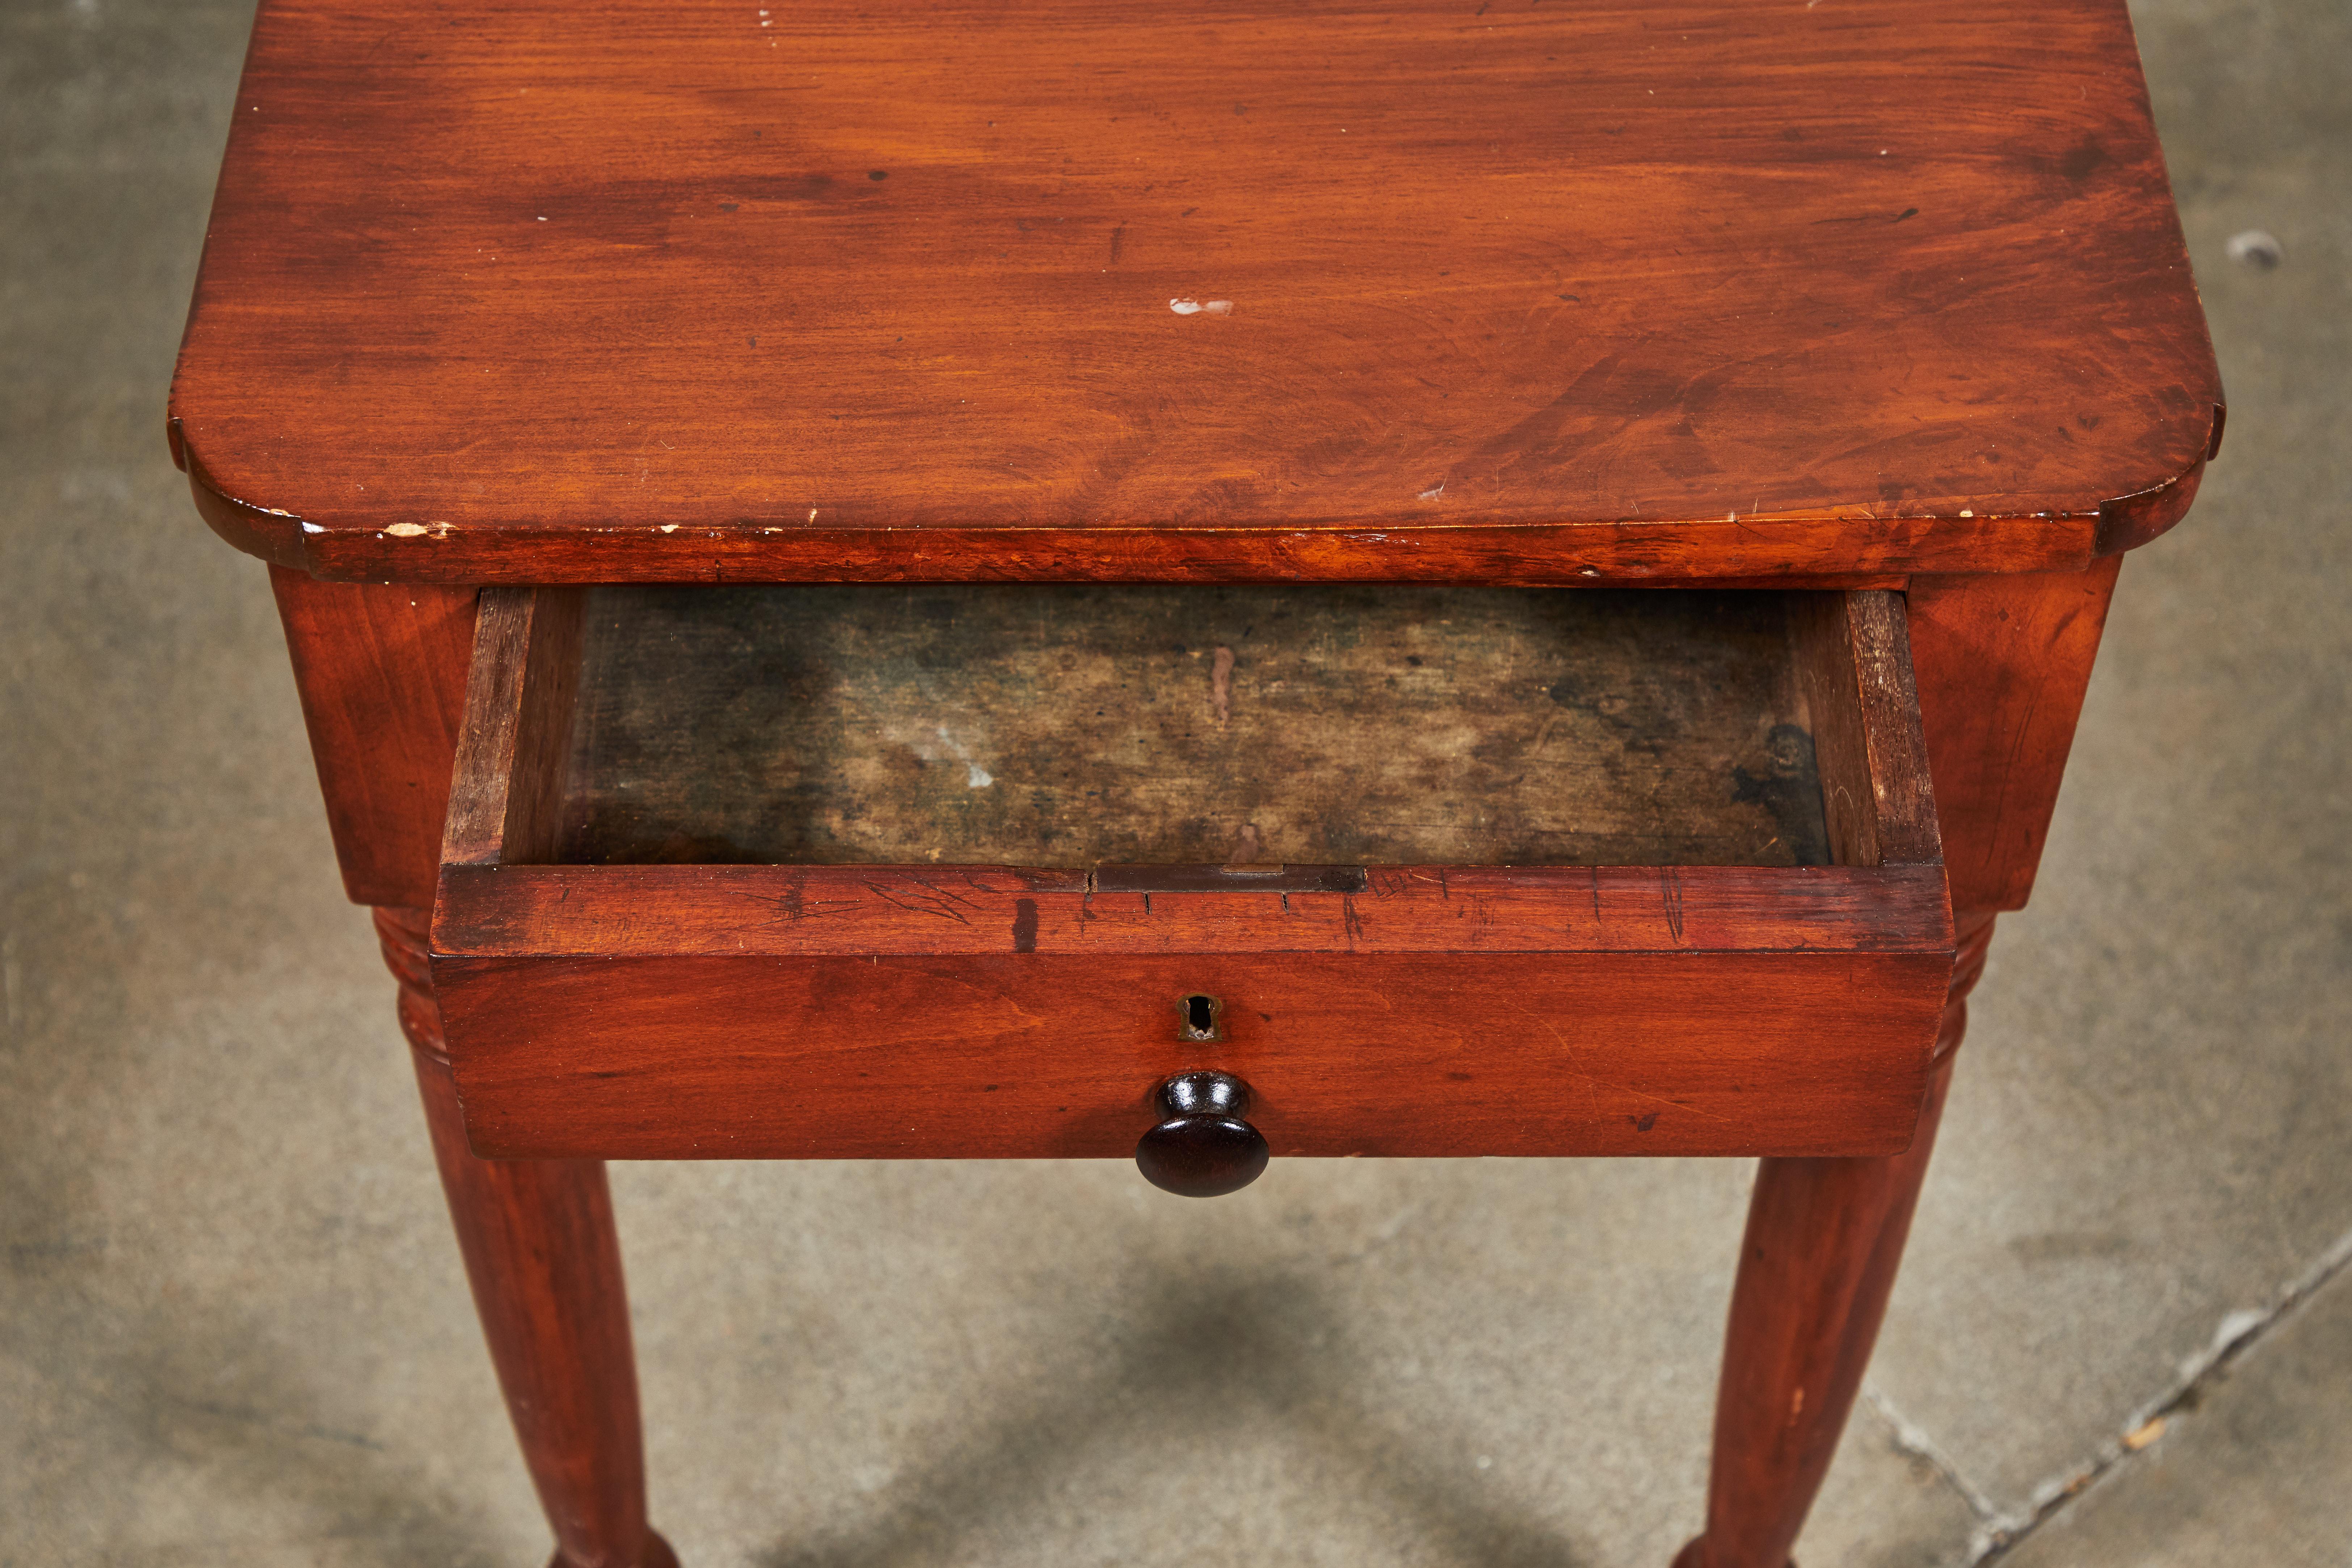 20th Century Early American Side Table with Drawer and Turned Legs